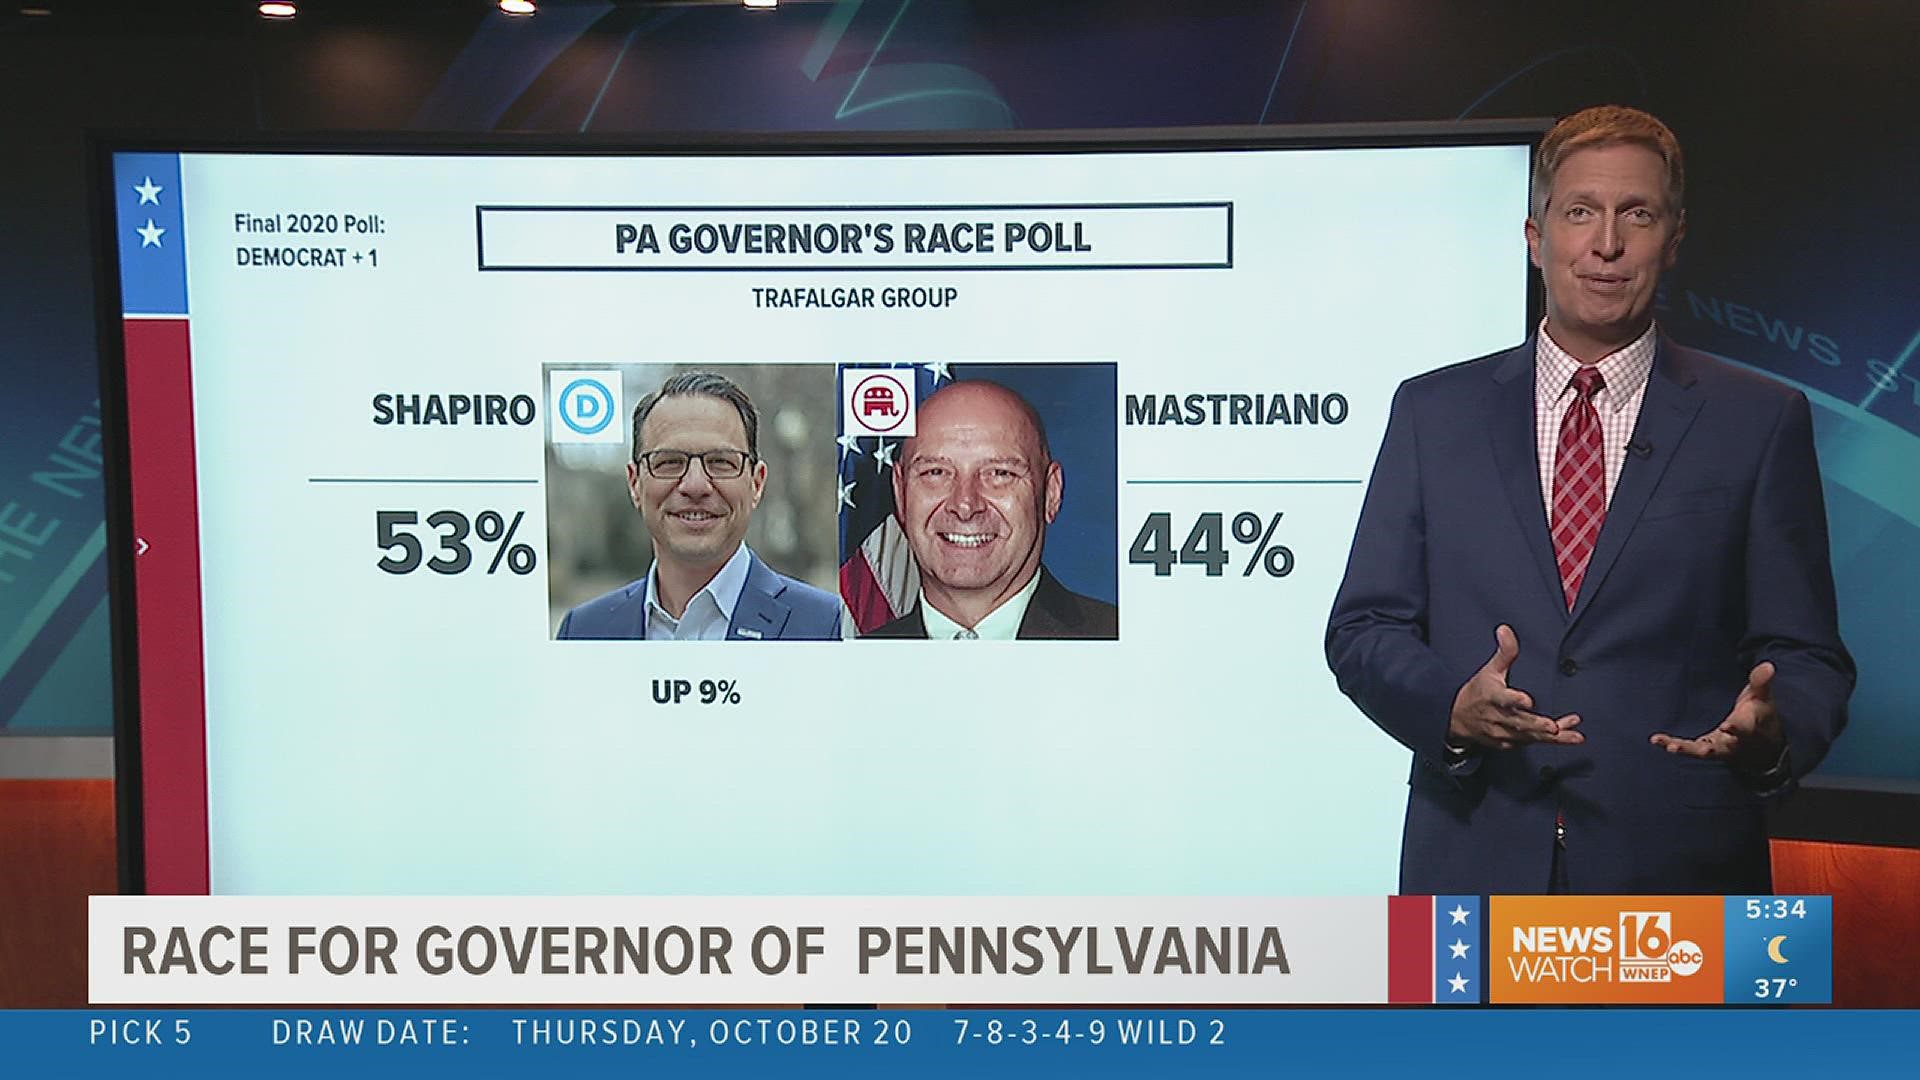 Jon looks at the poll numbers in the PA Governor race